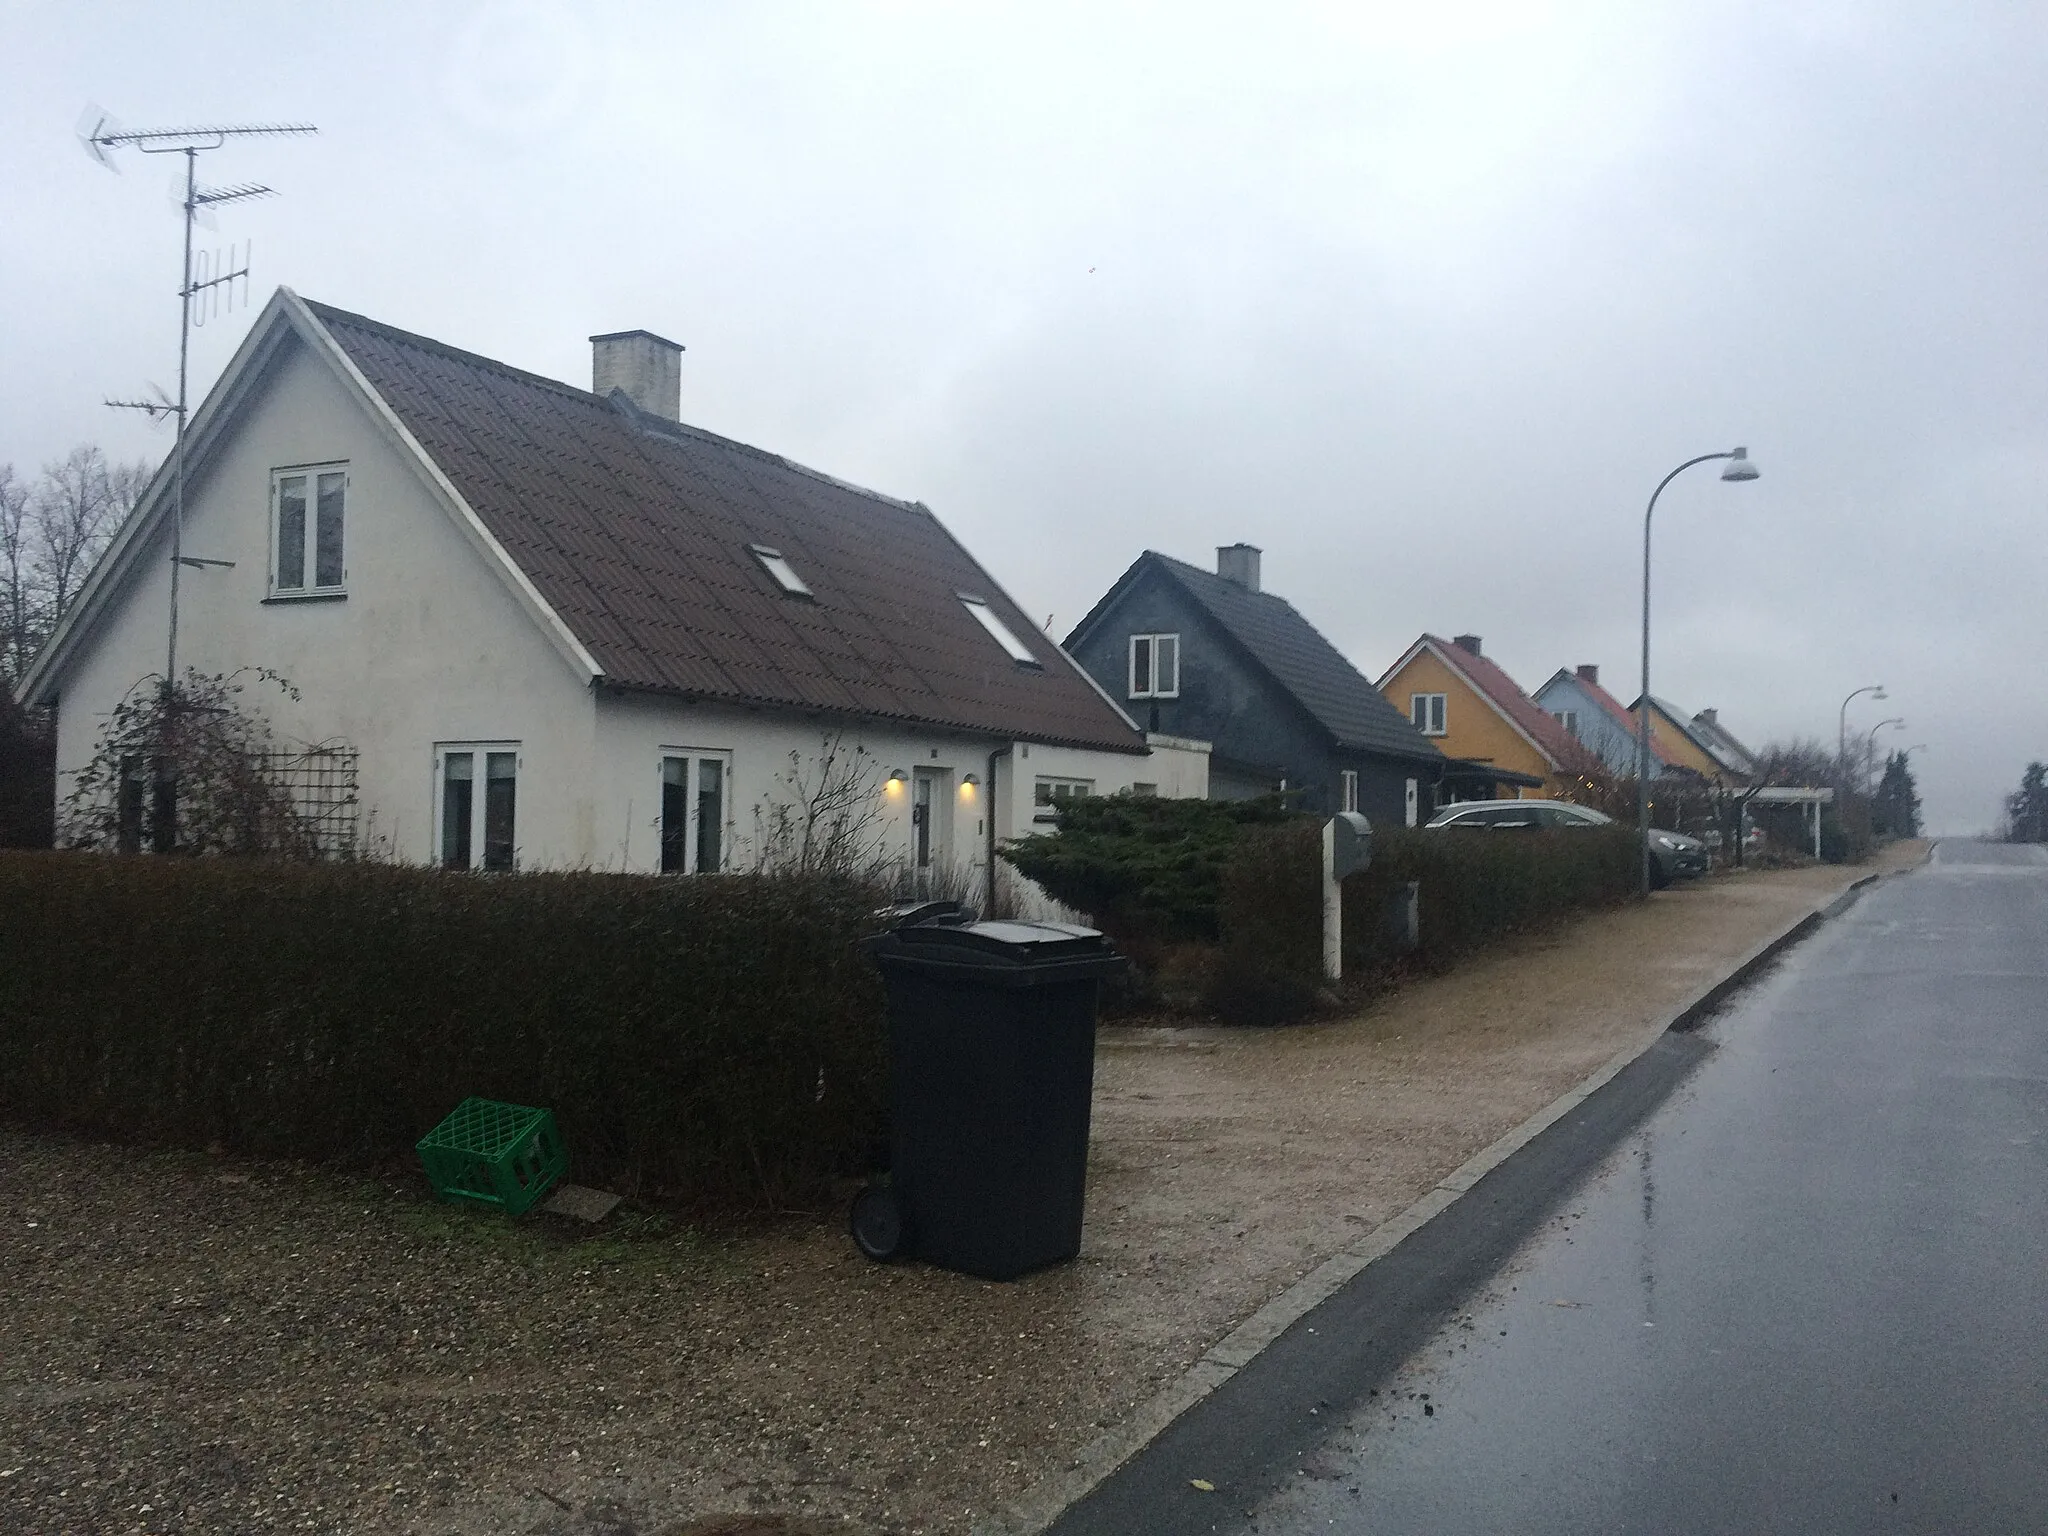 Photo showing: Typical houses in the housing area Måløvhøj in Ballerup Municipality, Denmark